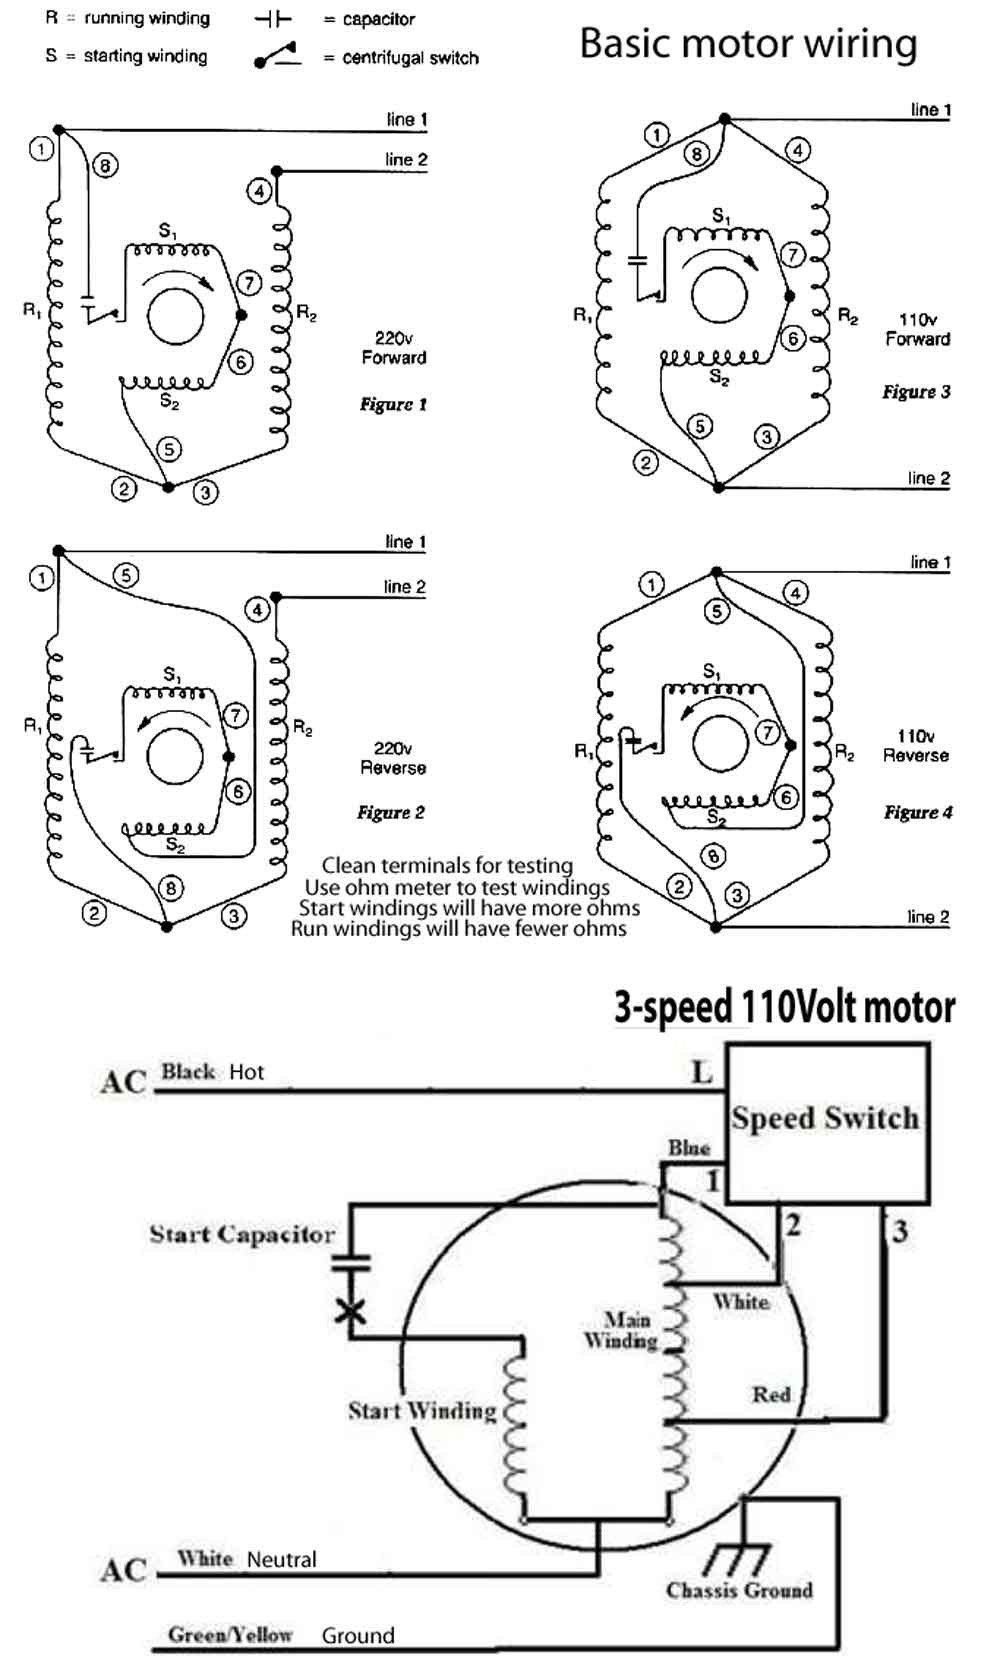 Wire size for motor